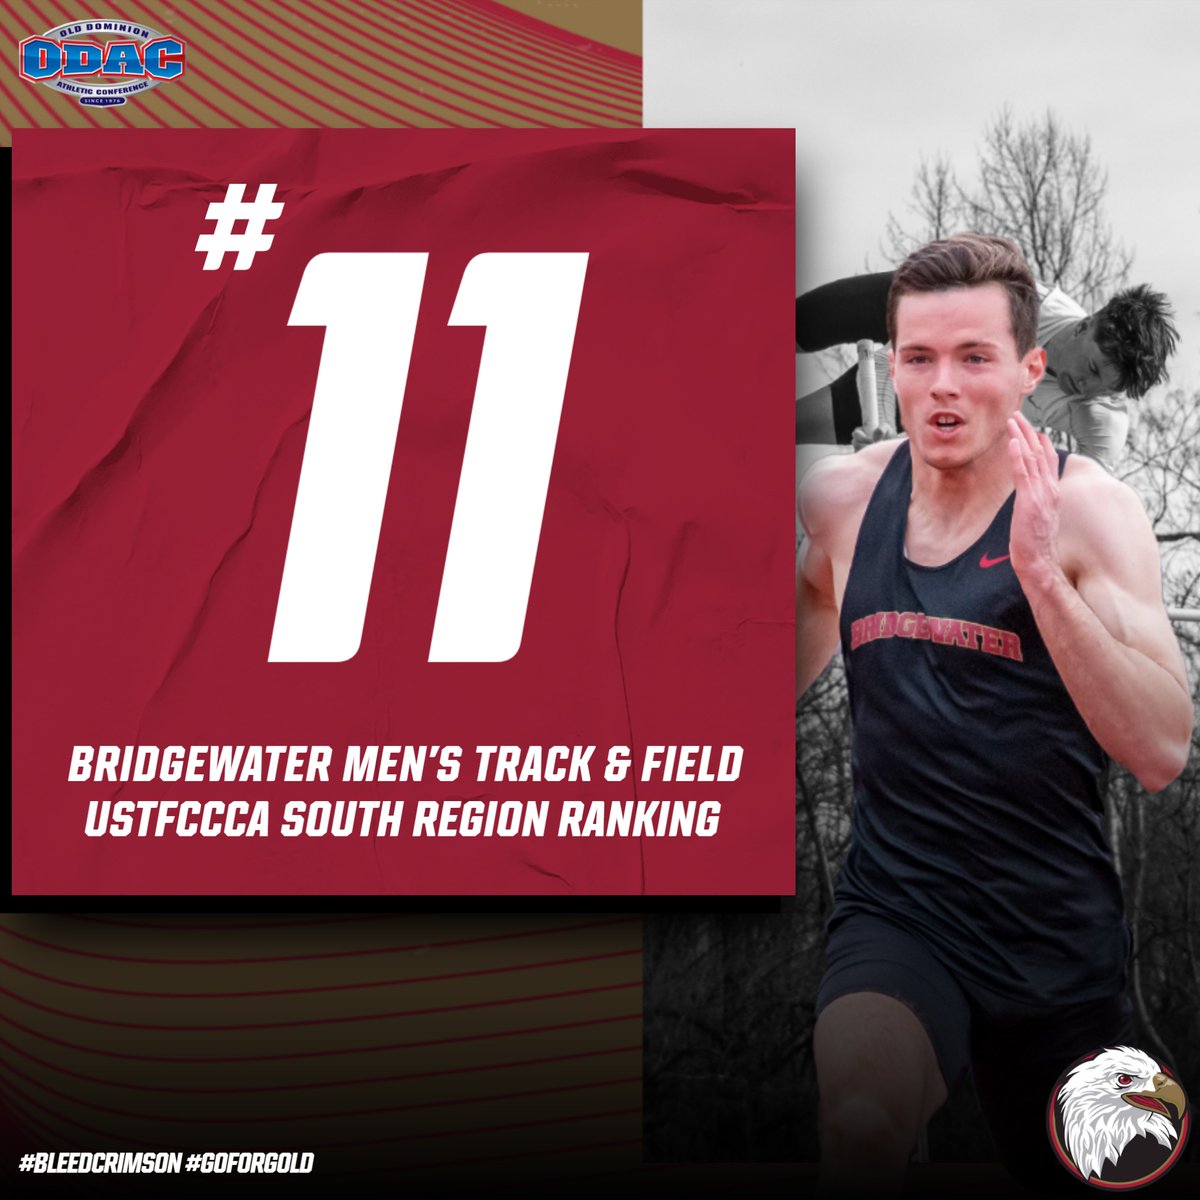 Feels good being ranked! Men's @BCXCTF wrapped up a successful weekend at the VertKlasse Meeting to claim 1⃣1⃣th in this week's USTFCCCA regional rankings #BleedCrimson #GoForGold 🔗 tinyurl.com/28wx92ps